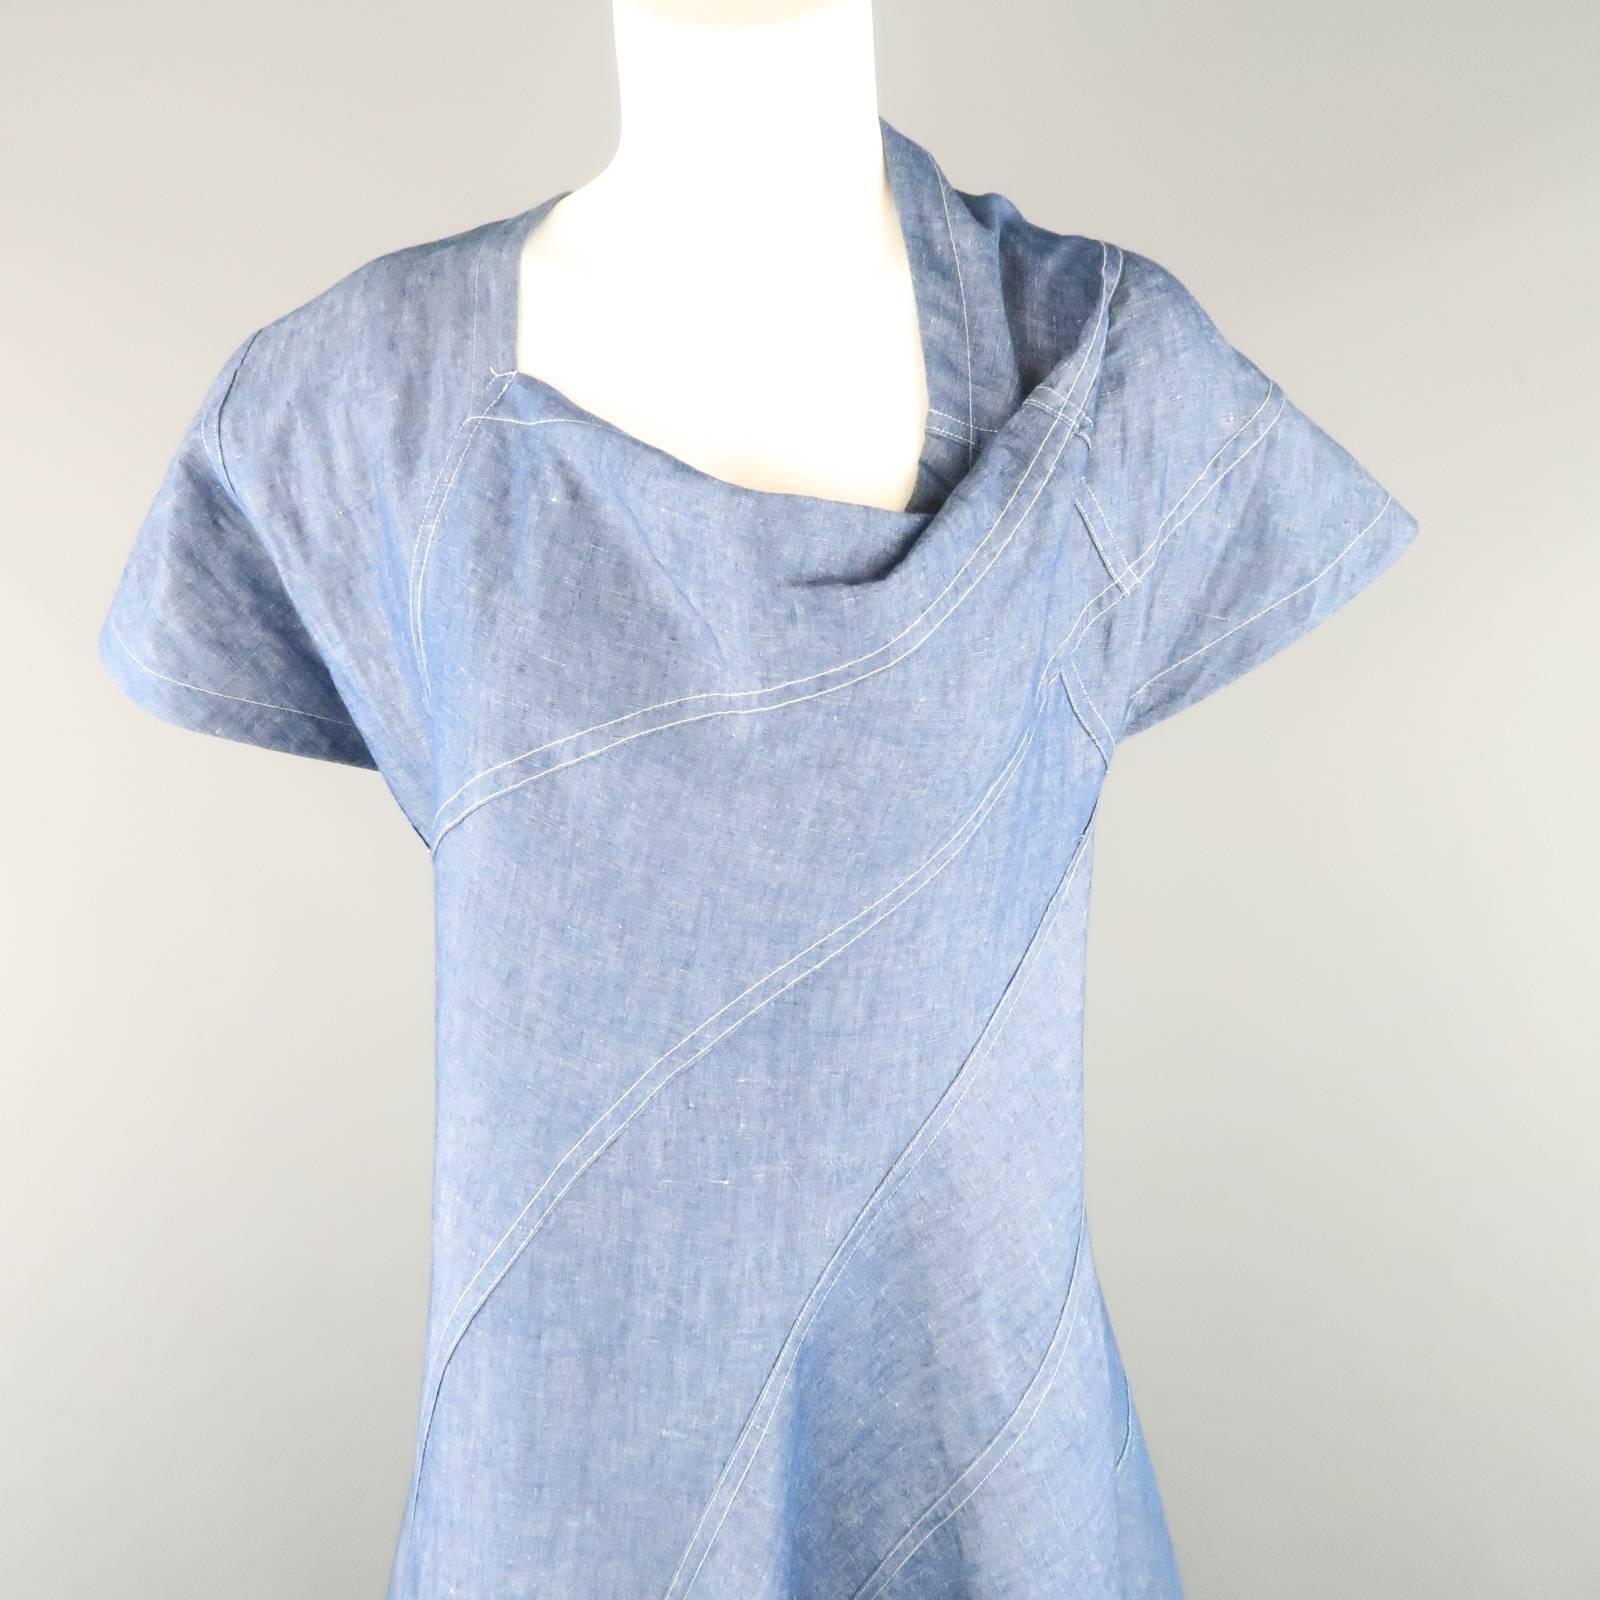 This unique JUNYA WATANABE Comme des Garcons DENIM dress comes in a cotton linen blend denim blue material and features an all over patchwork construction, asymmetrical draped neckline, and flaired skirt. Made in Hungary.
 
Excellent Pre-Owned